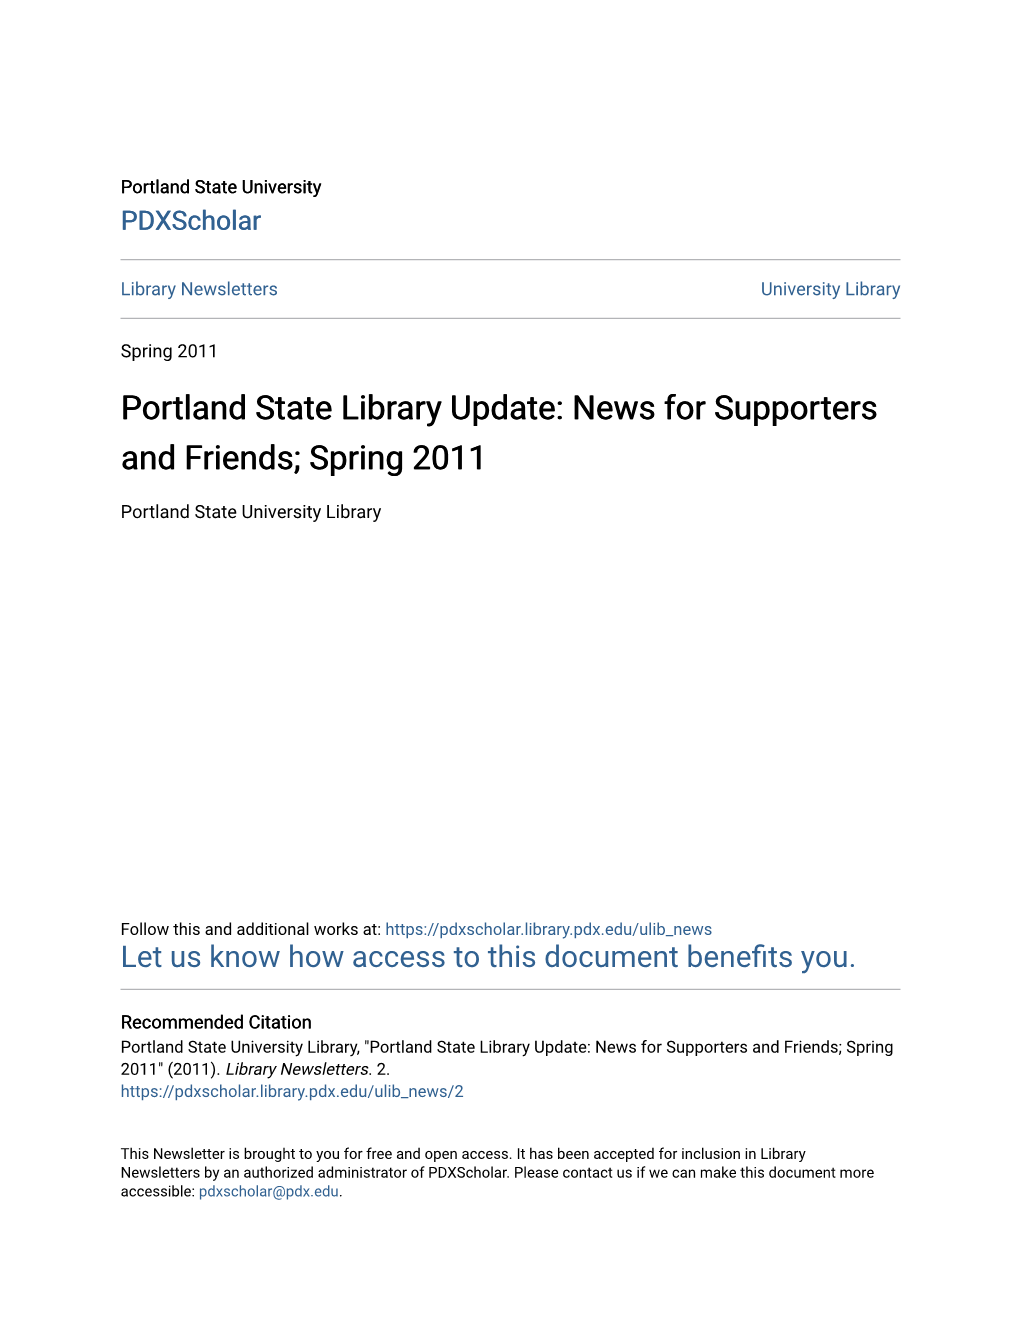 Portland State Library Update: News for Supporters and Friends; Spring 2011